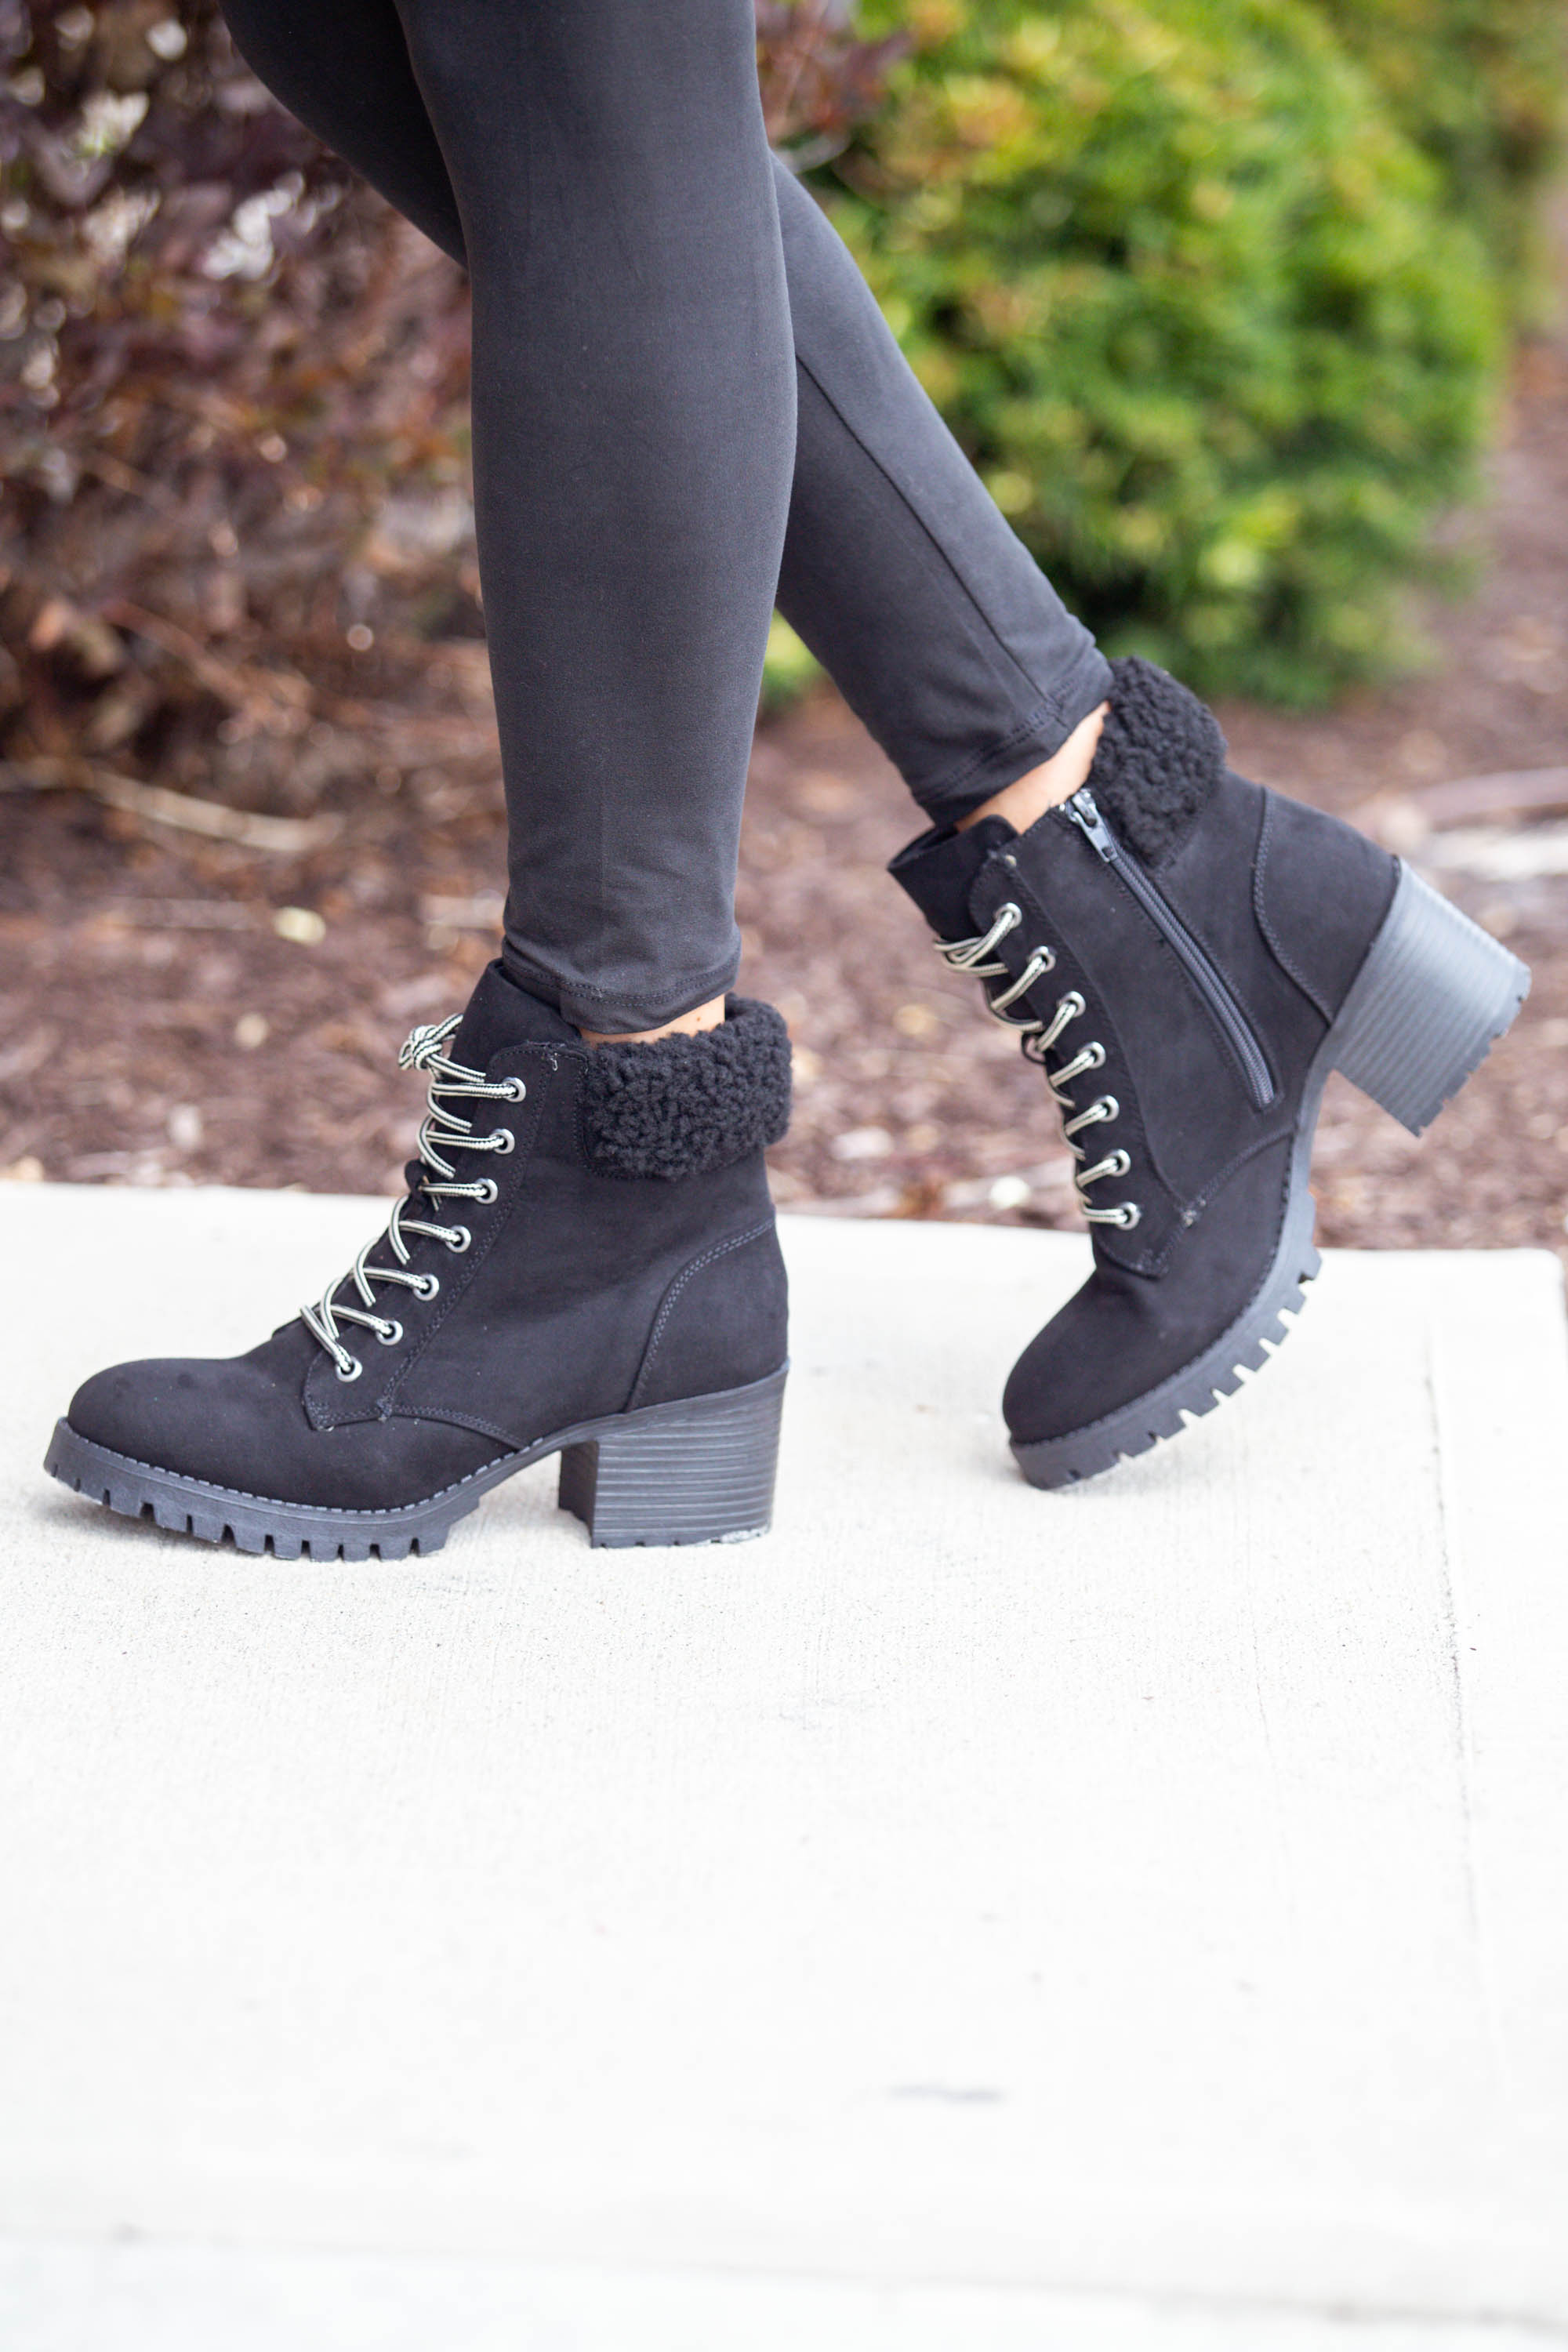 comfy booties for fall